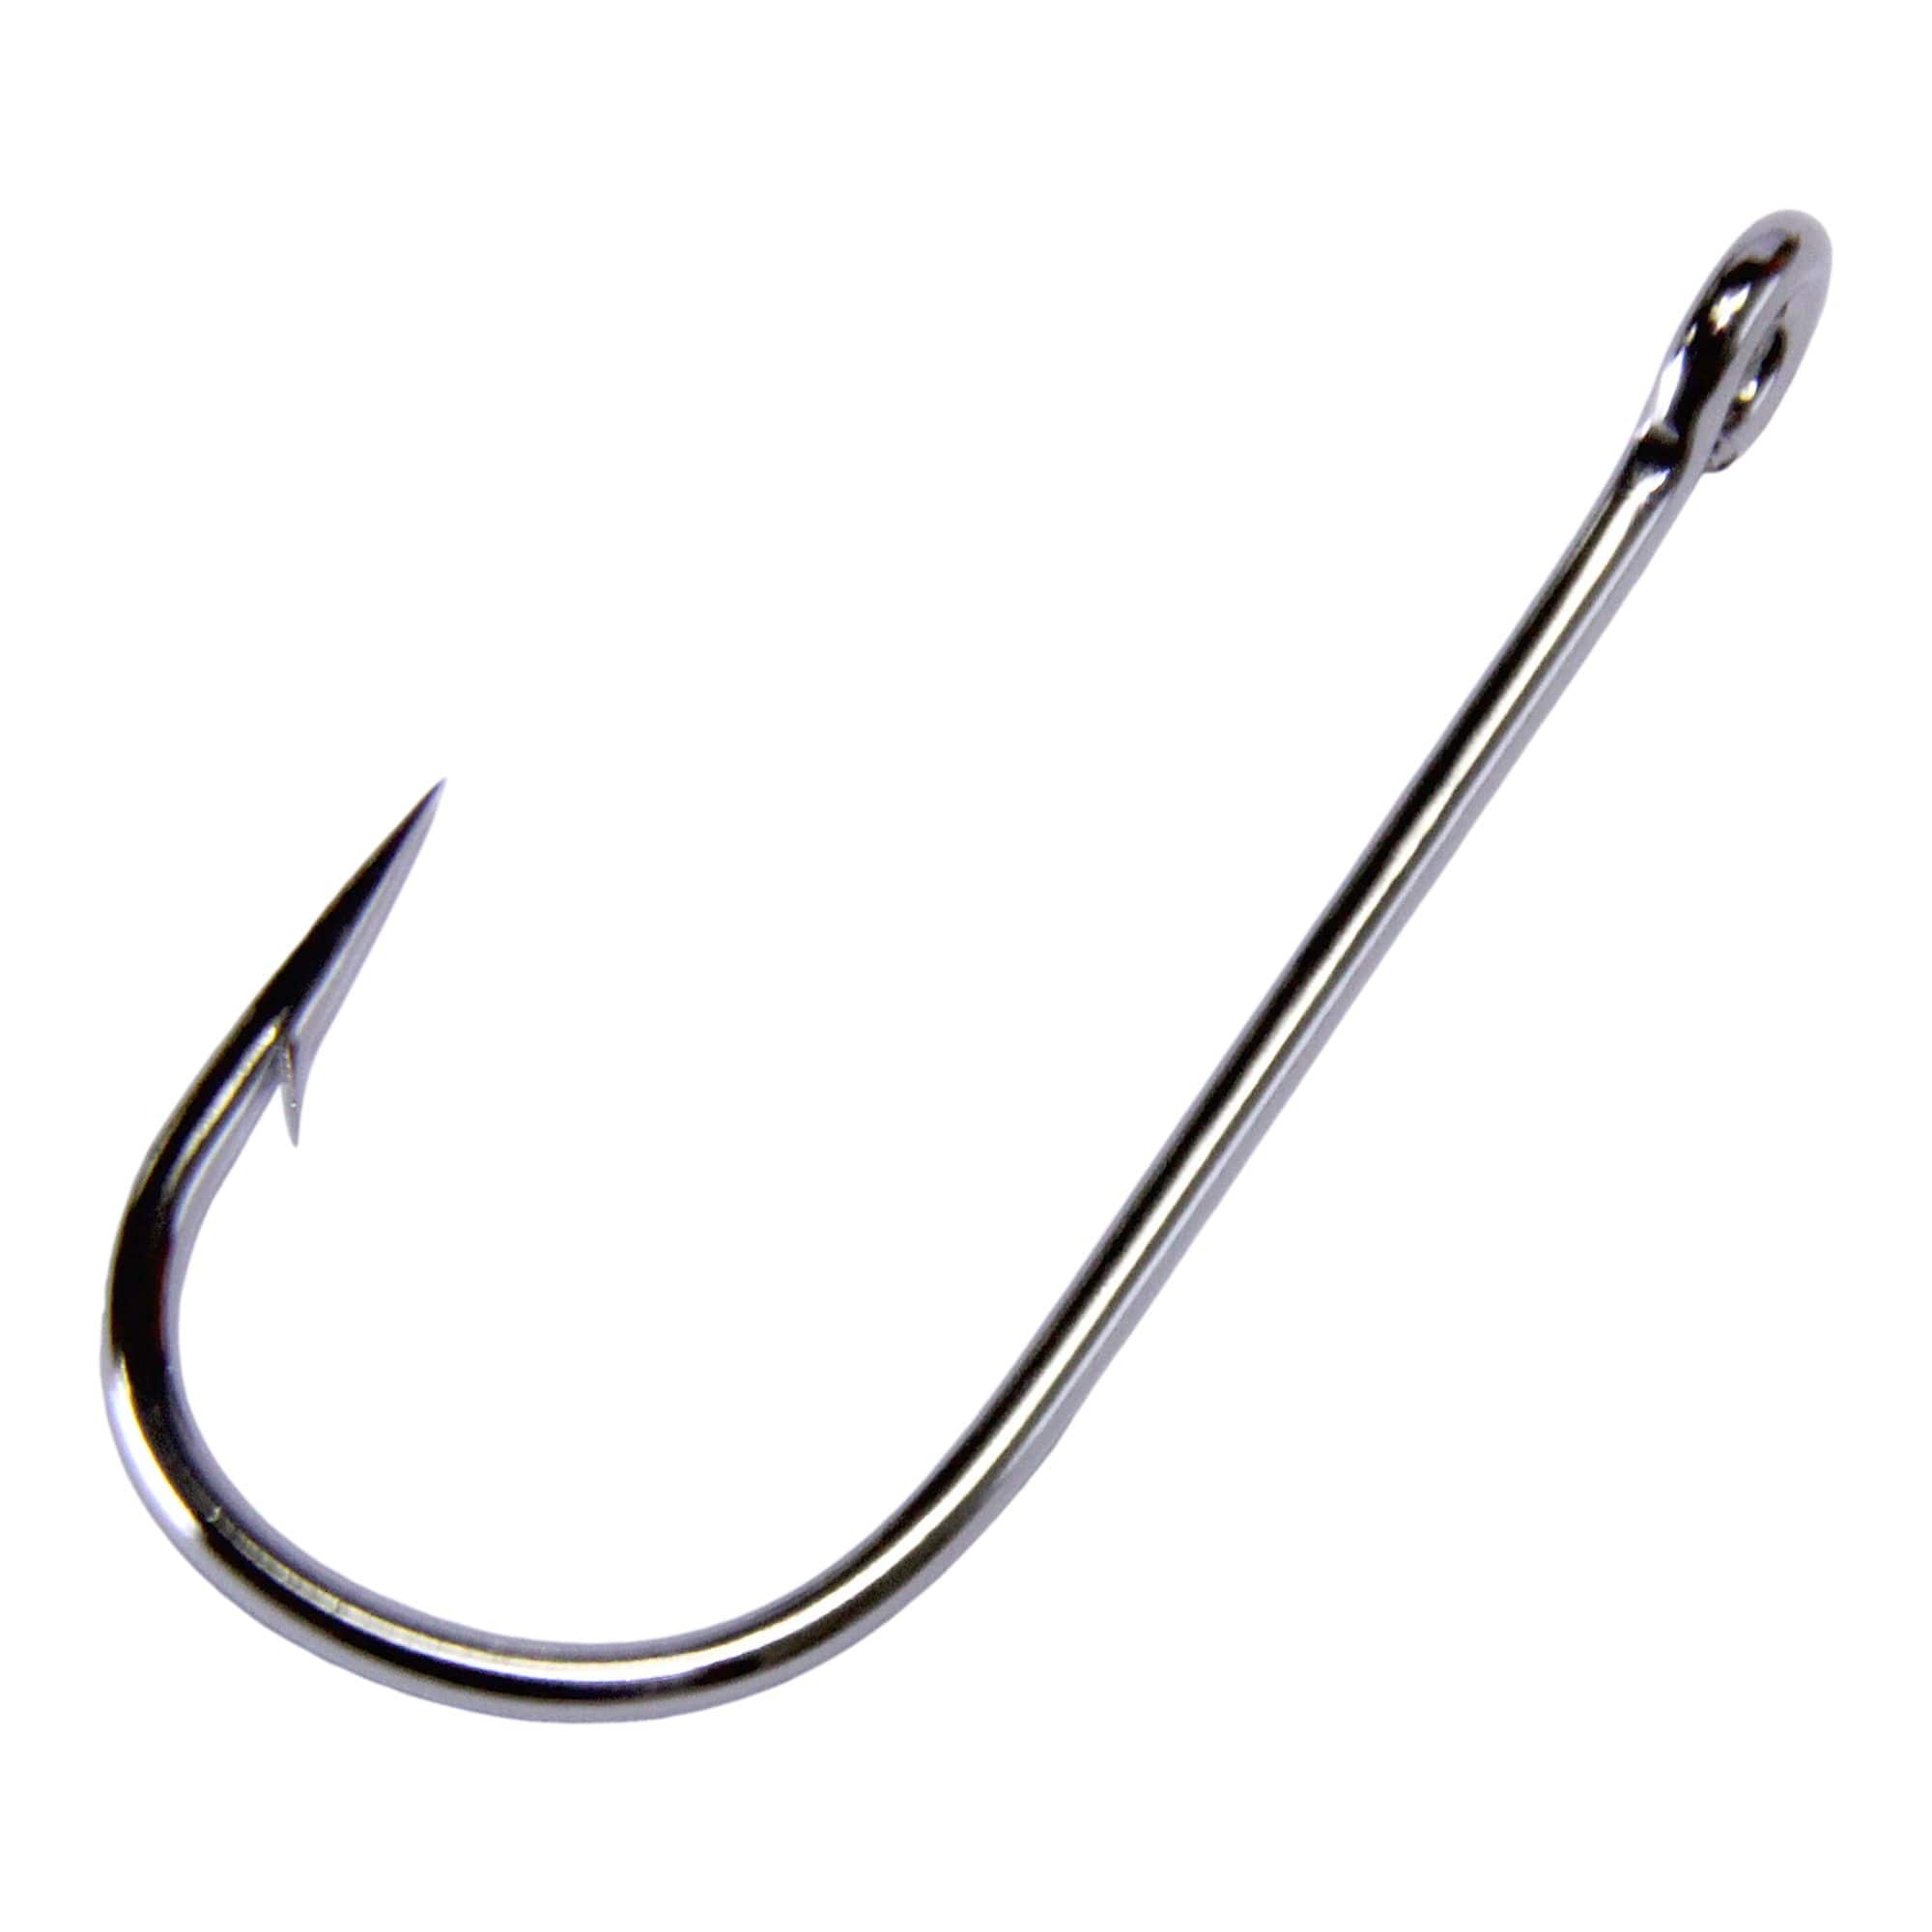 Fly Tying Hooks Barbless 50 Count Box SHN39 sizes #2 -18 Black